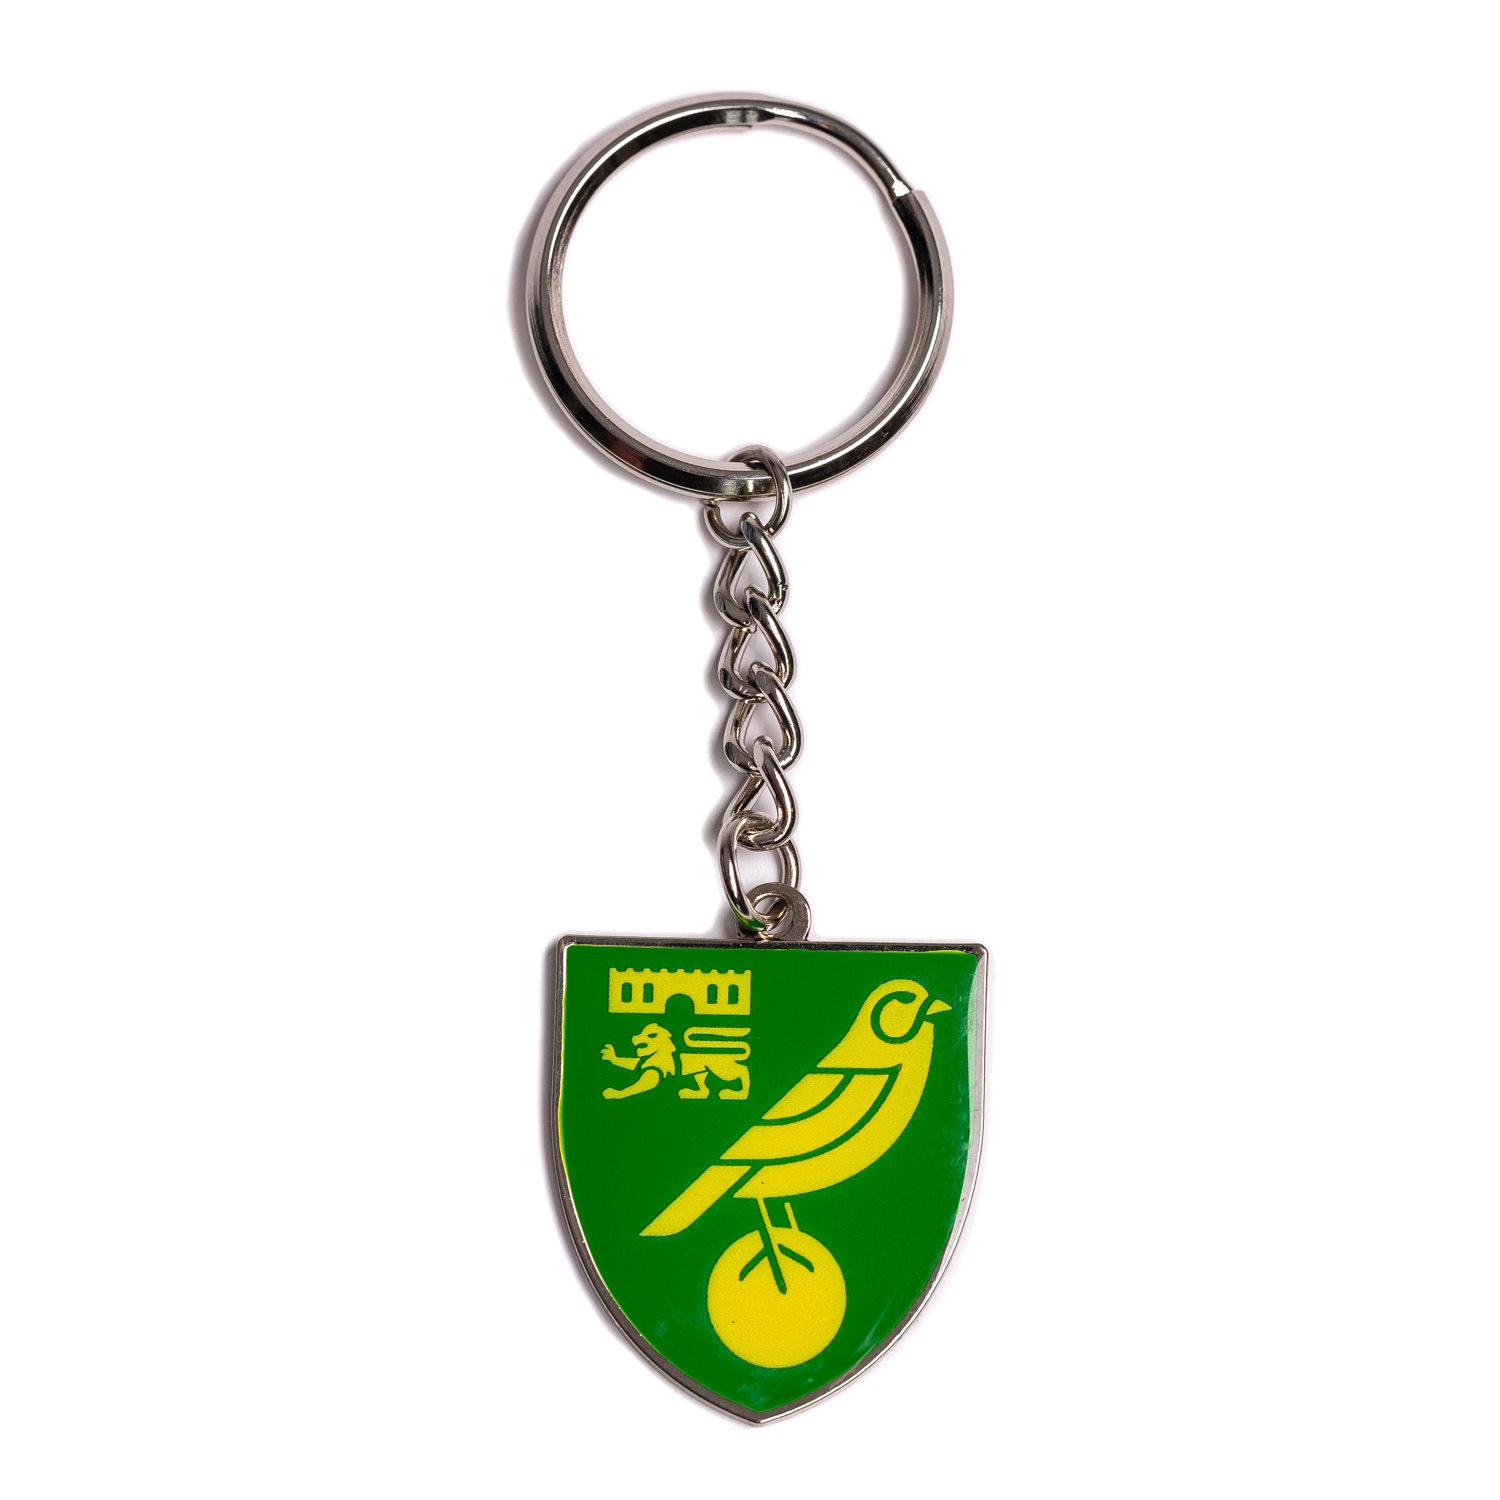 OFFICIAL NORWICH CITY FC KEYRING 